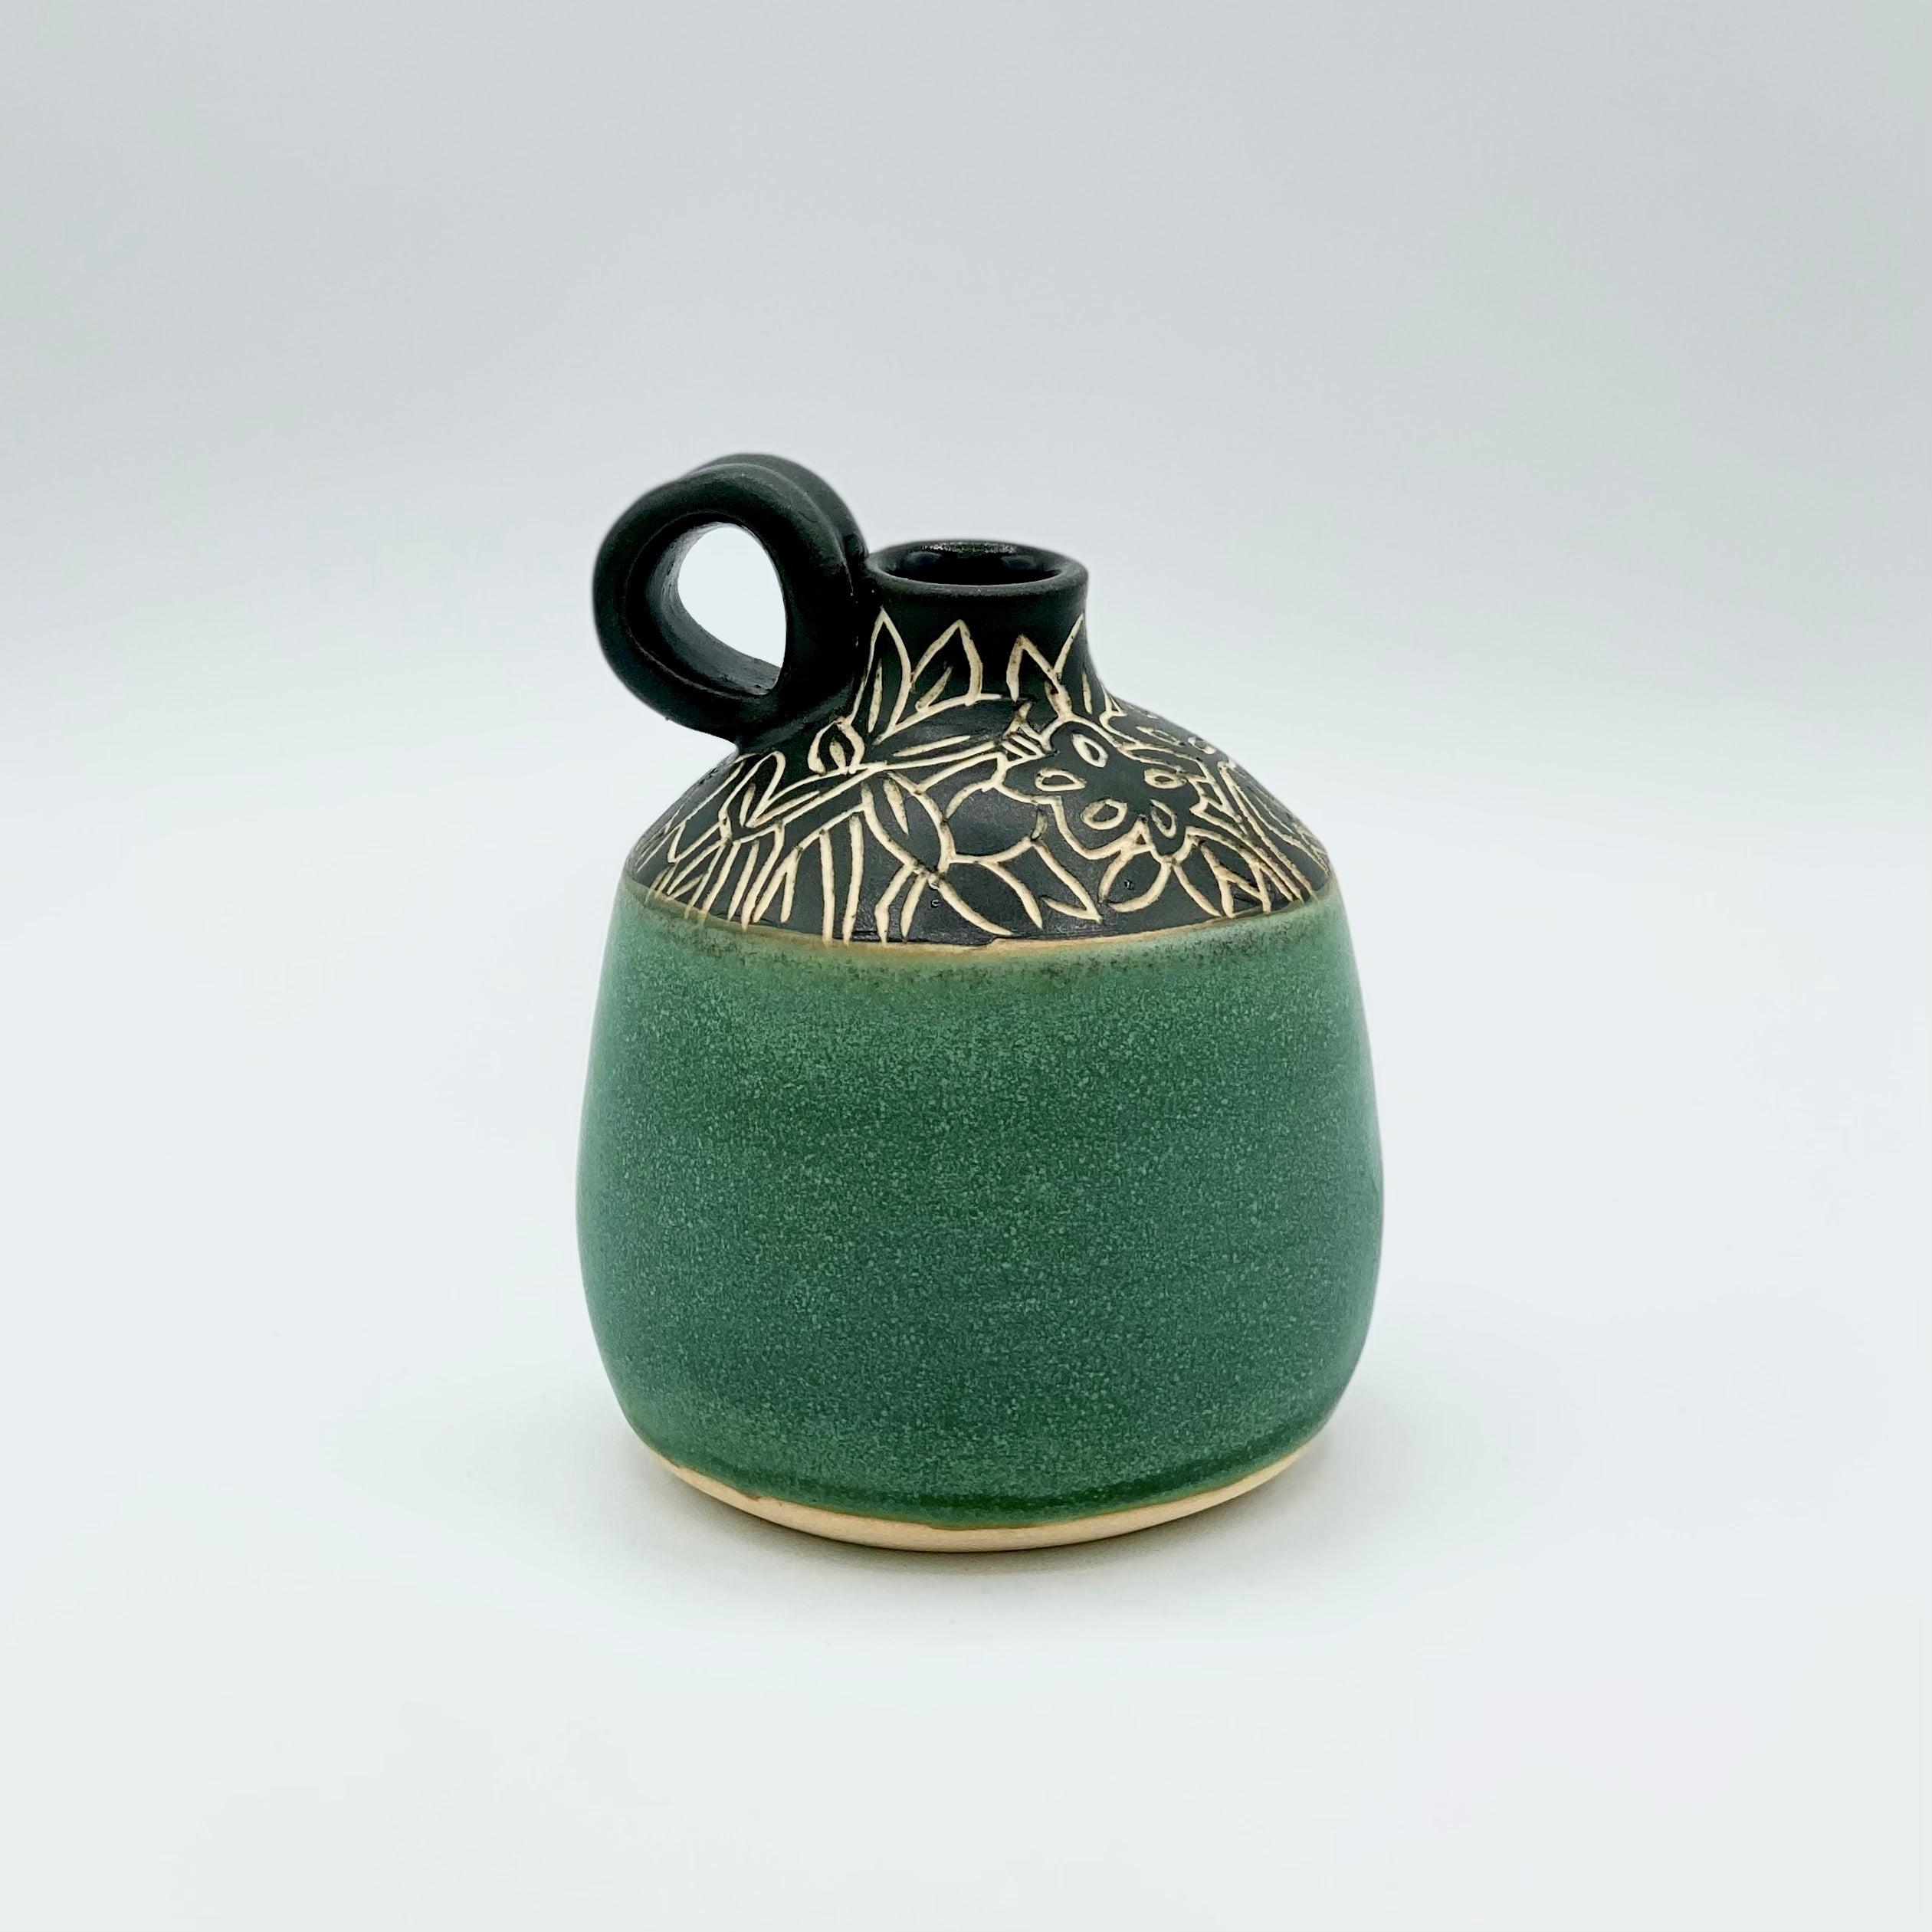 Aesop’s Fables Watering Bells by Maru Pottery